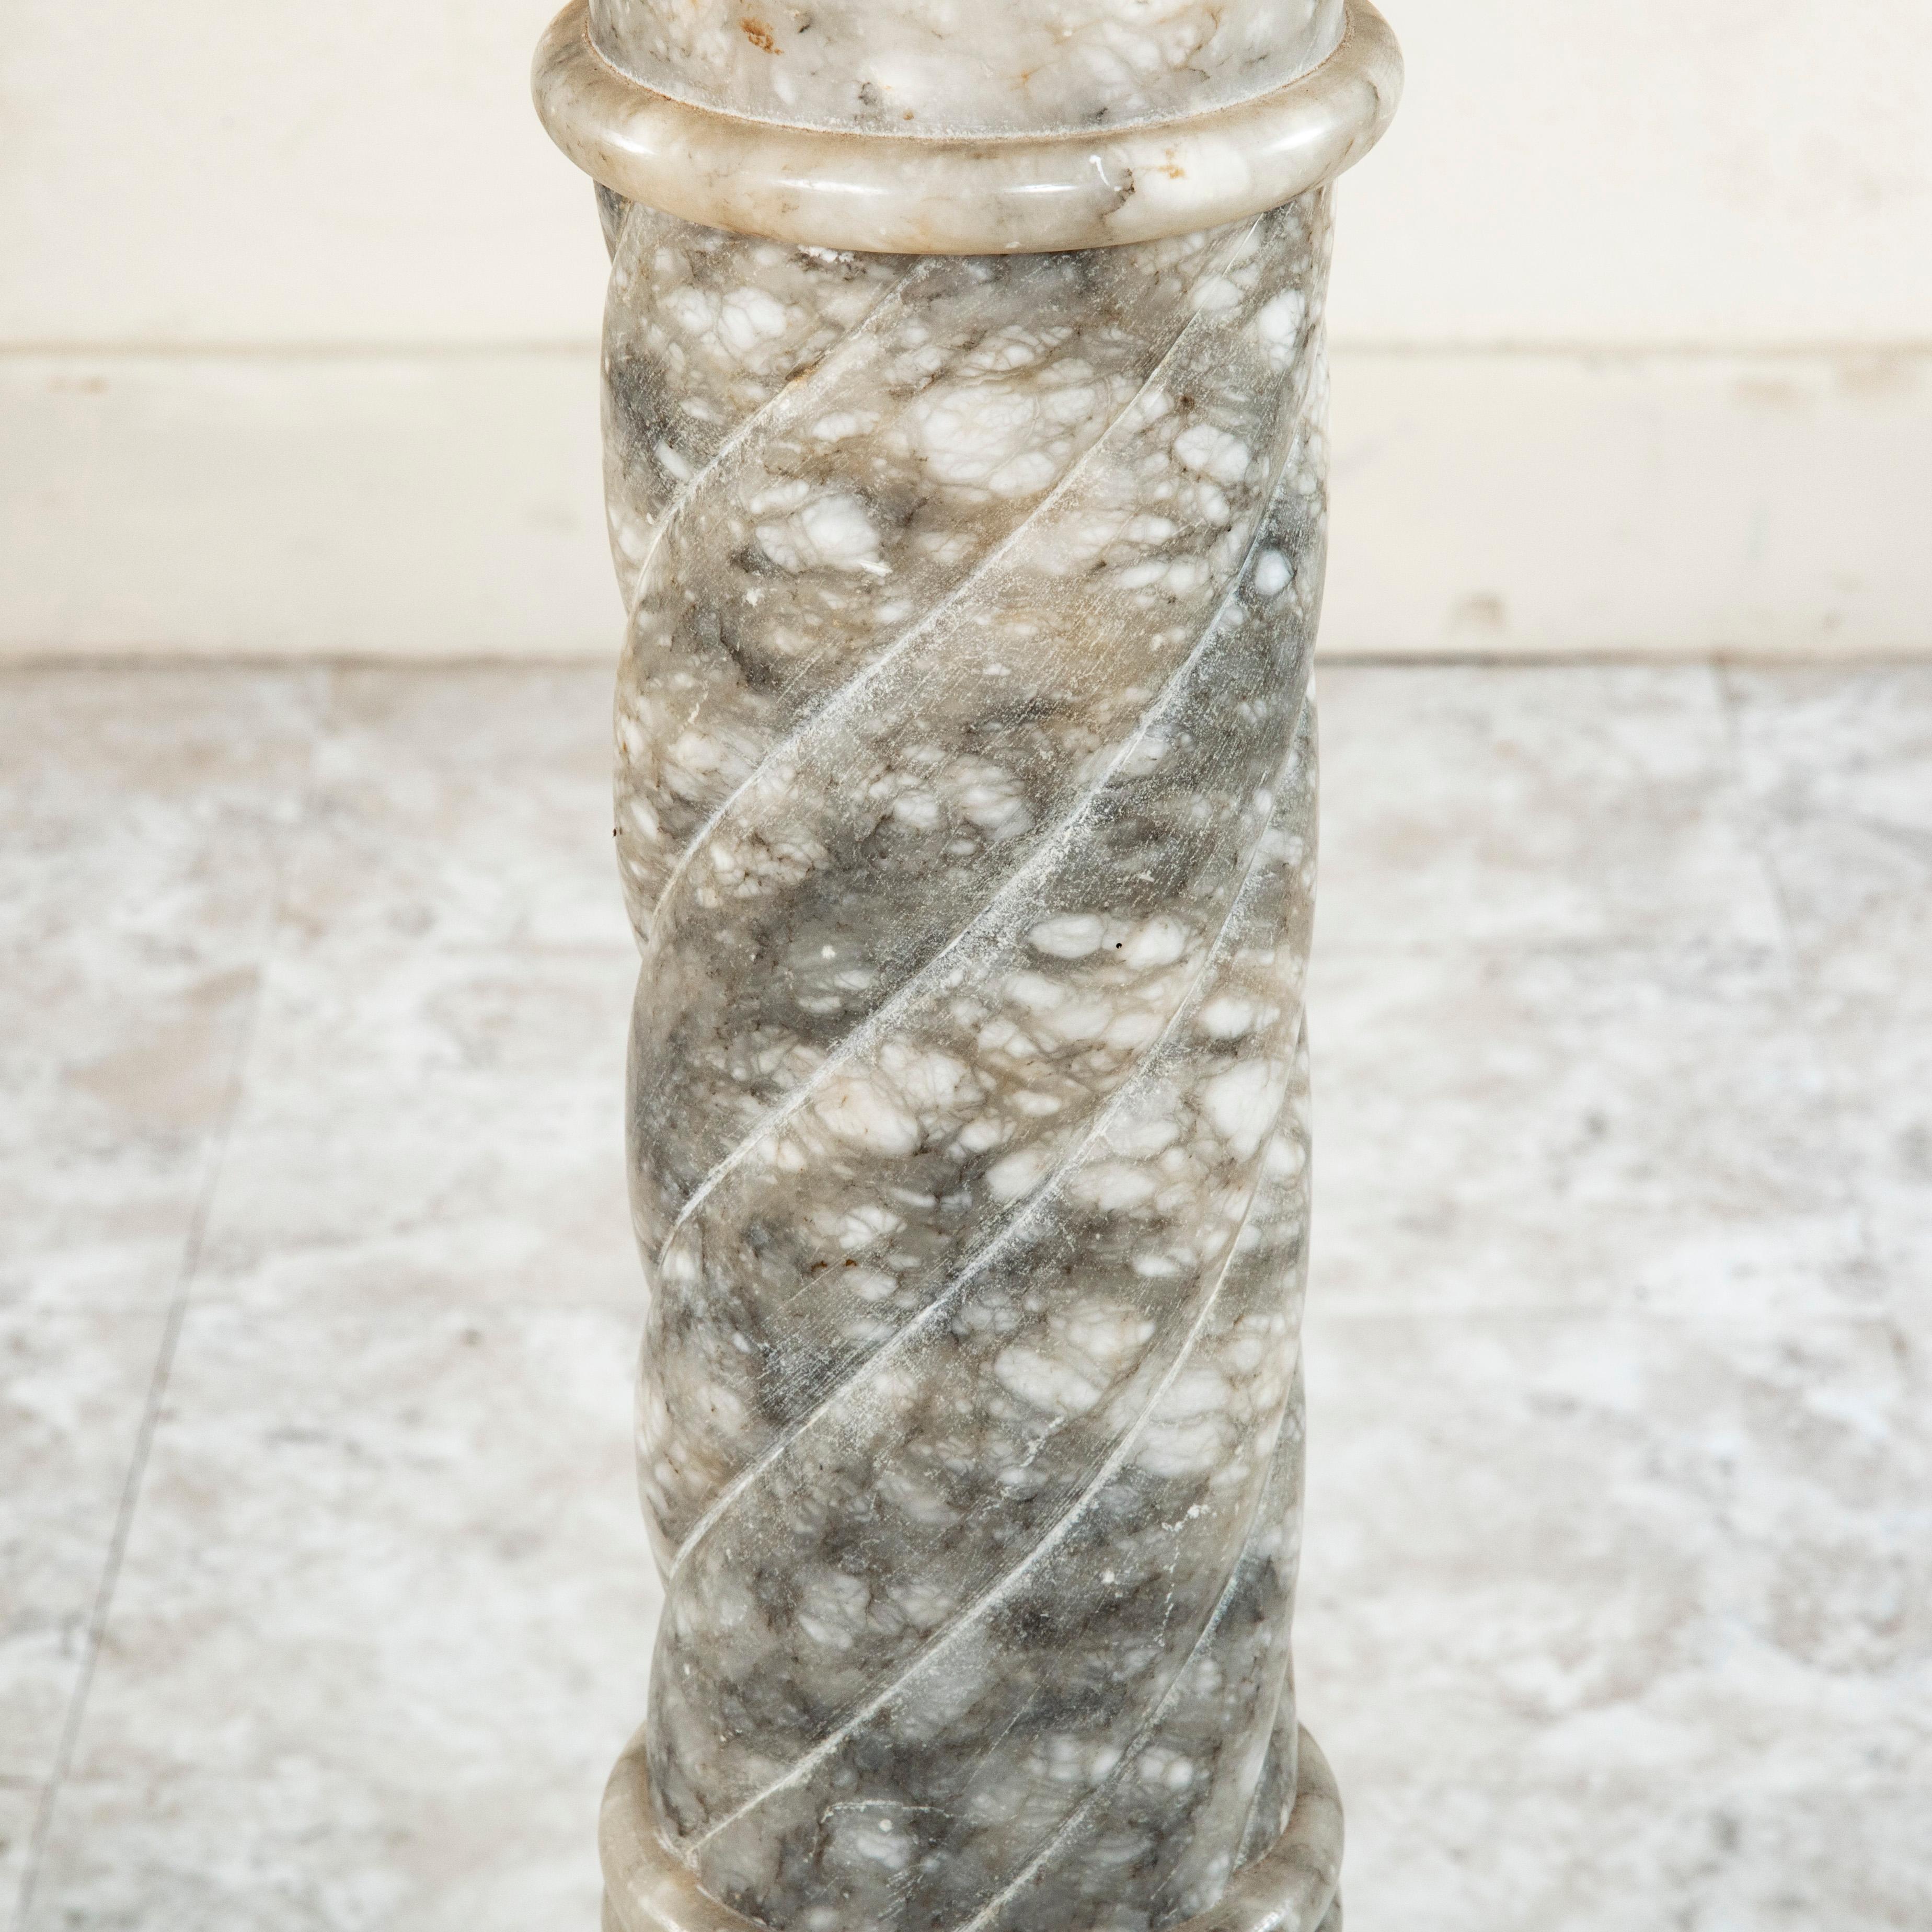 Late 19th century French Marble Column, Pedestal, or Sculpture Stand 5